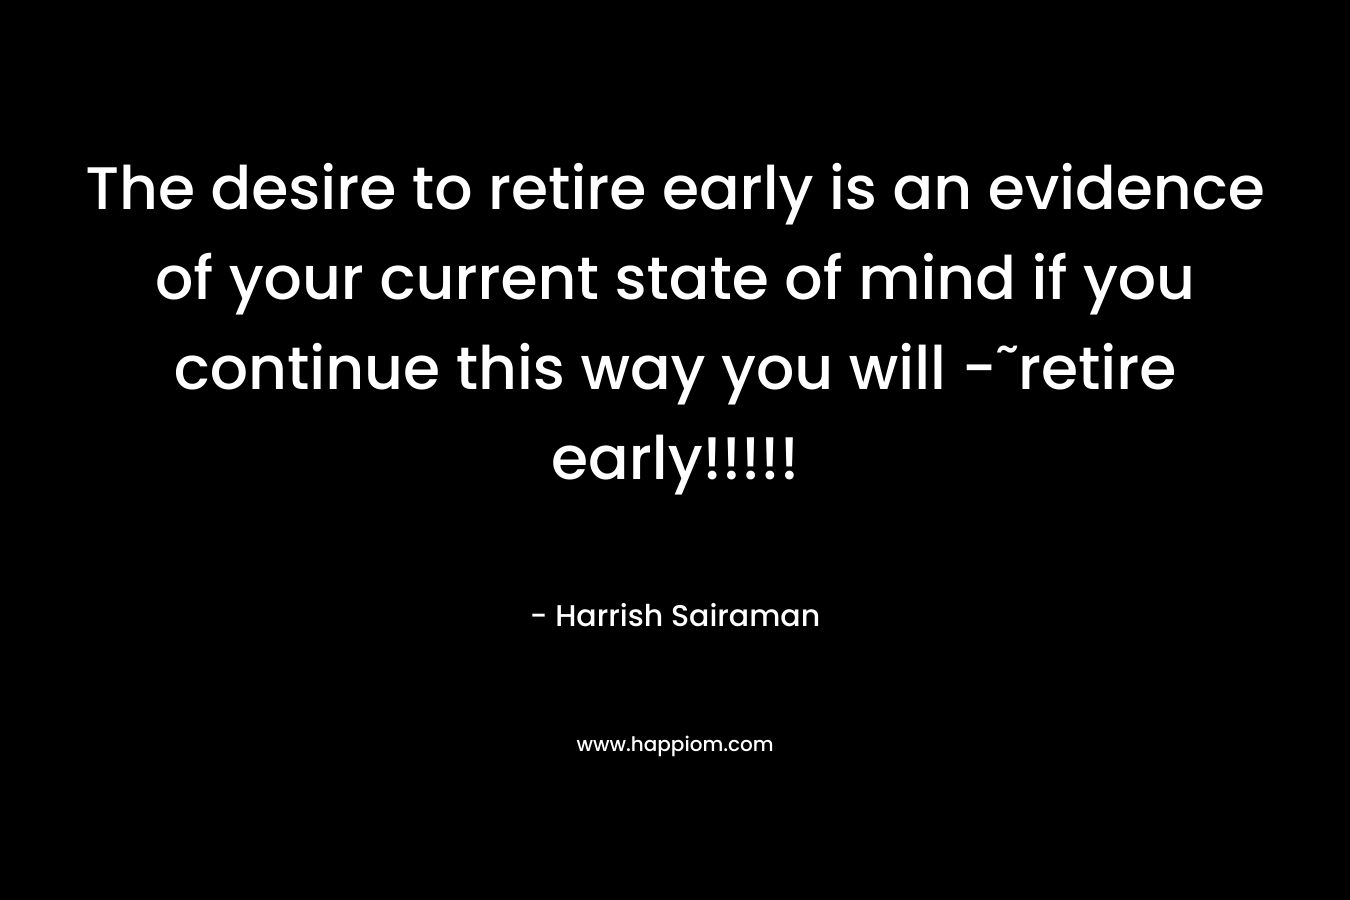 The desire to retire early is an evidence of your current state of mind if you continue this way you will -˜retire early!!!!!